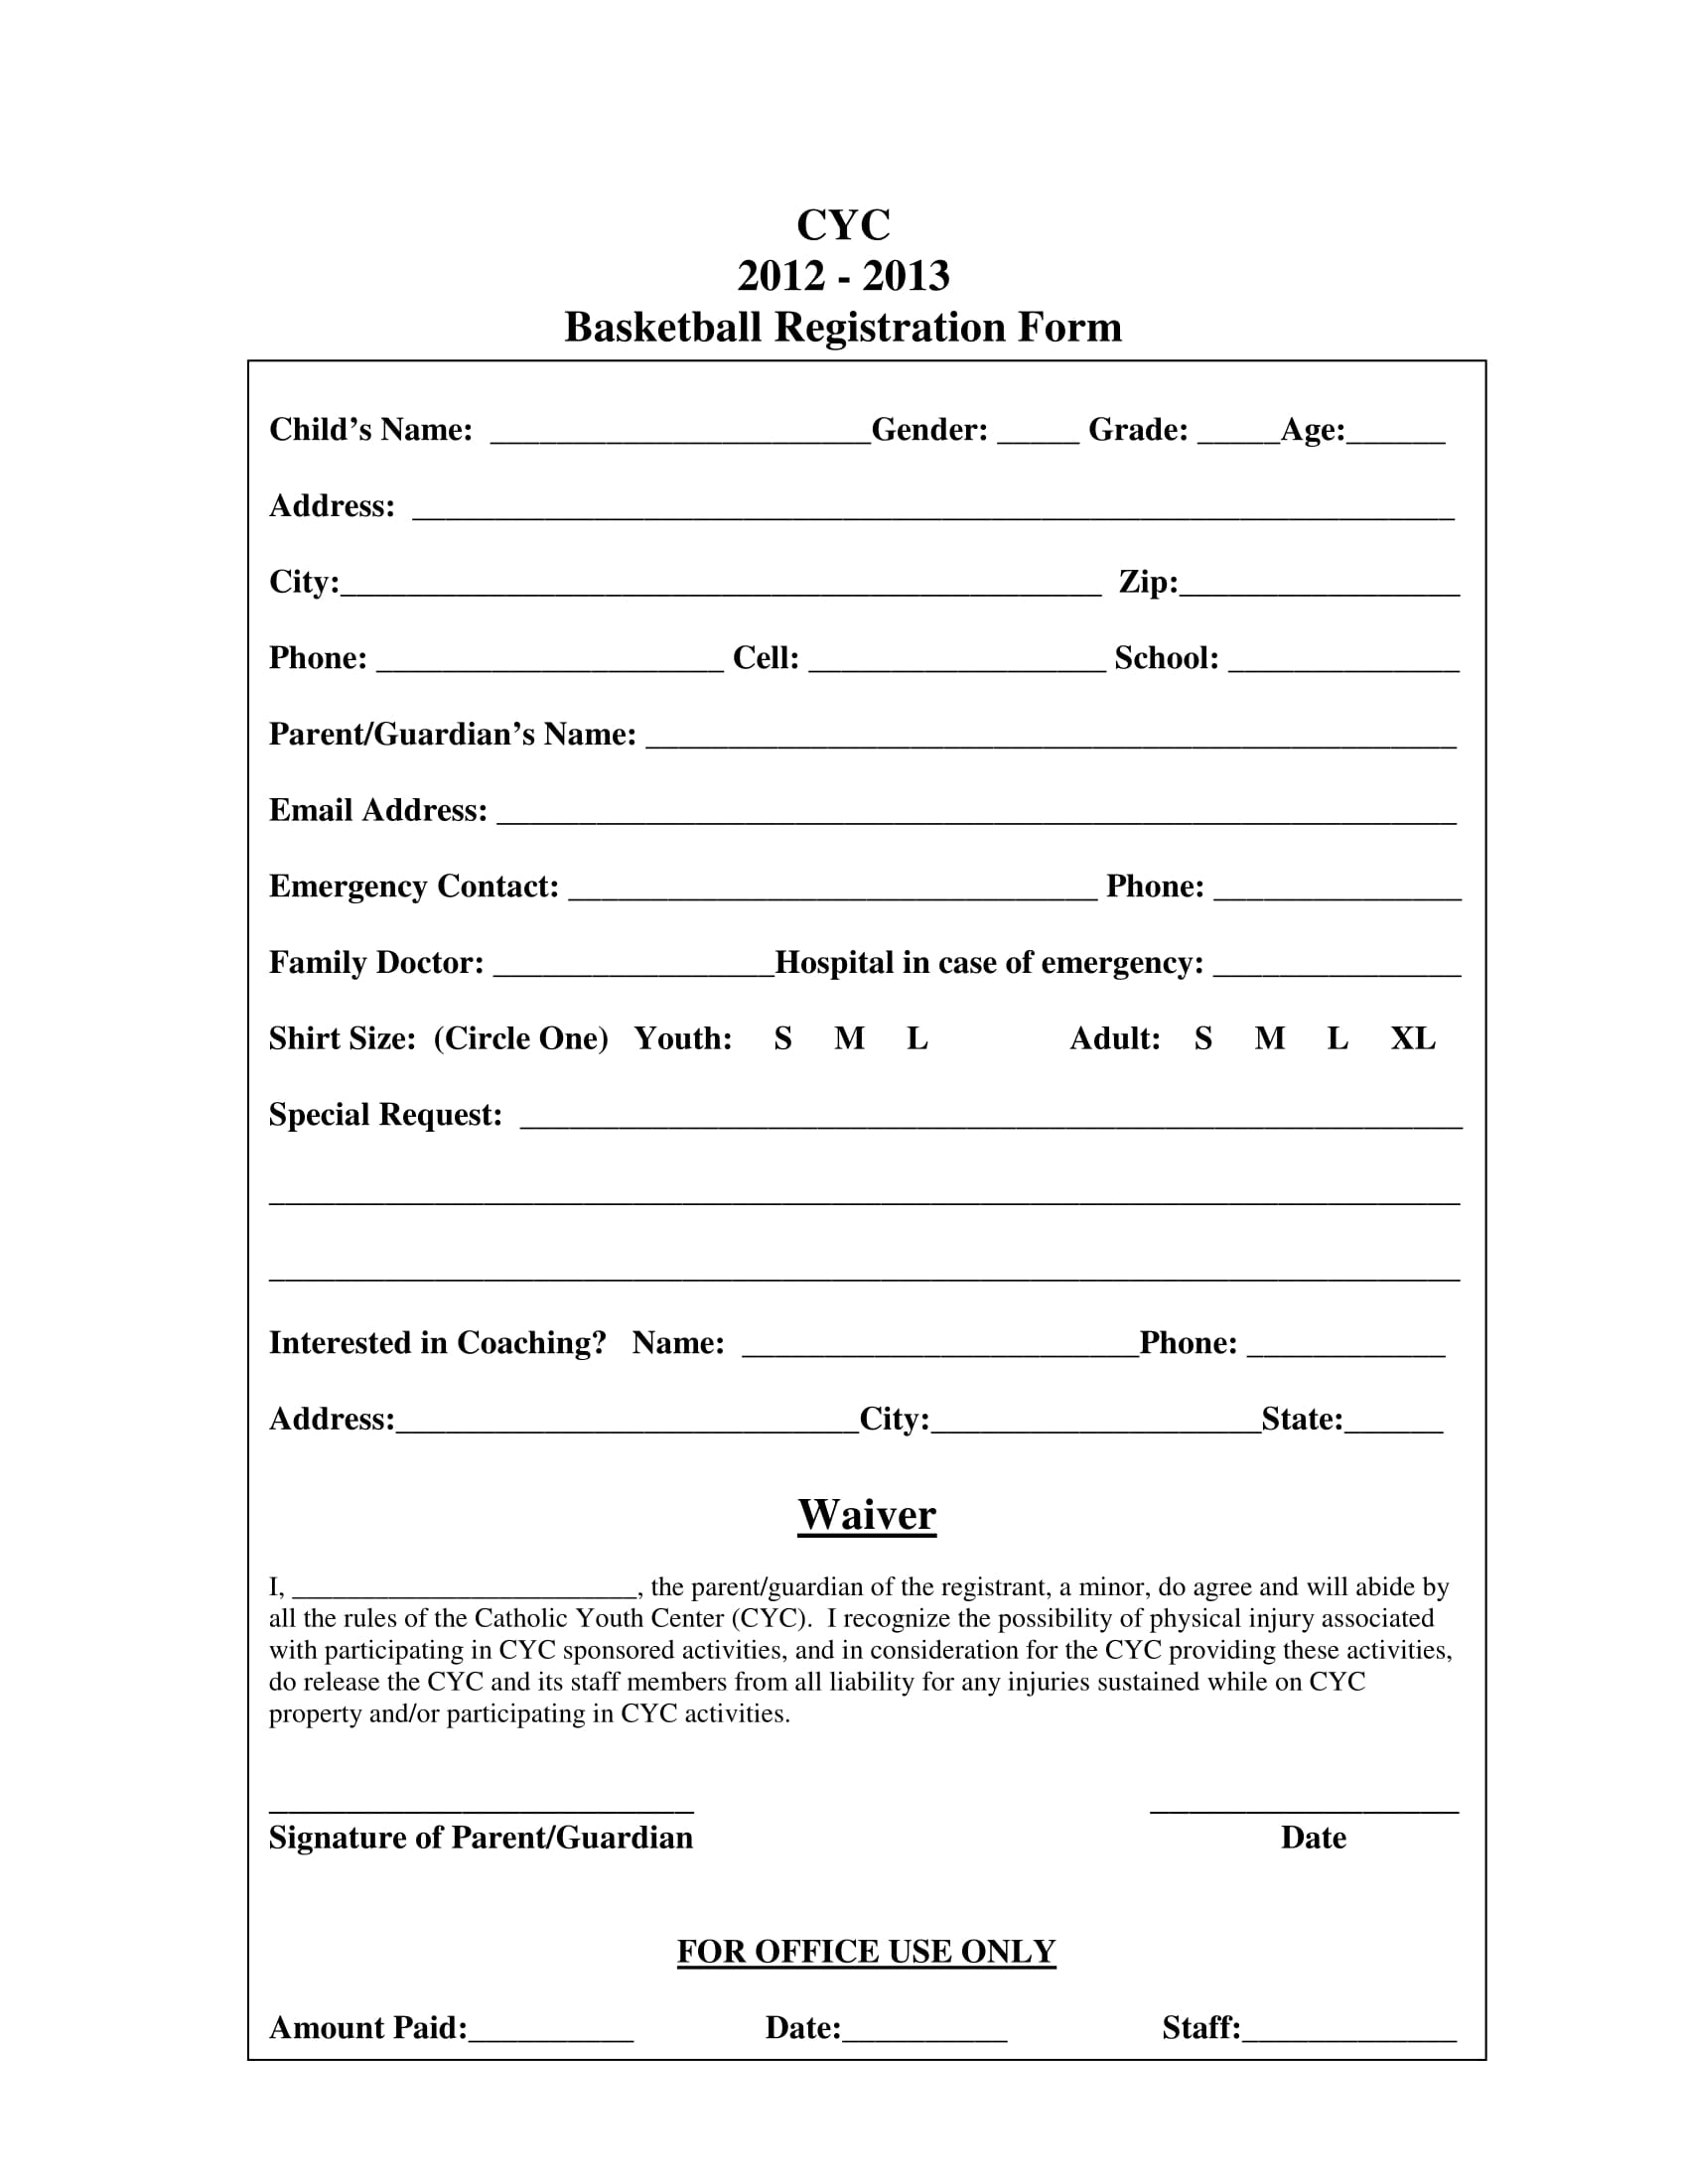 Aau Basketball Registration Form Template Master of